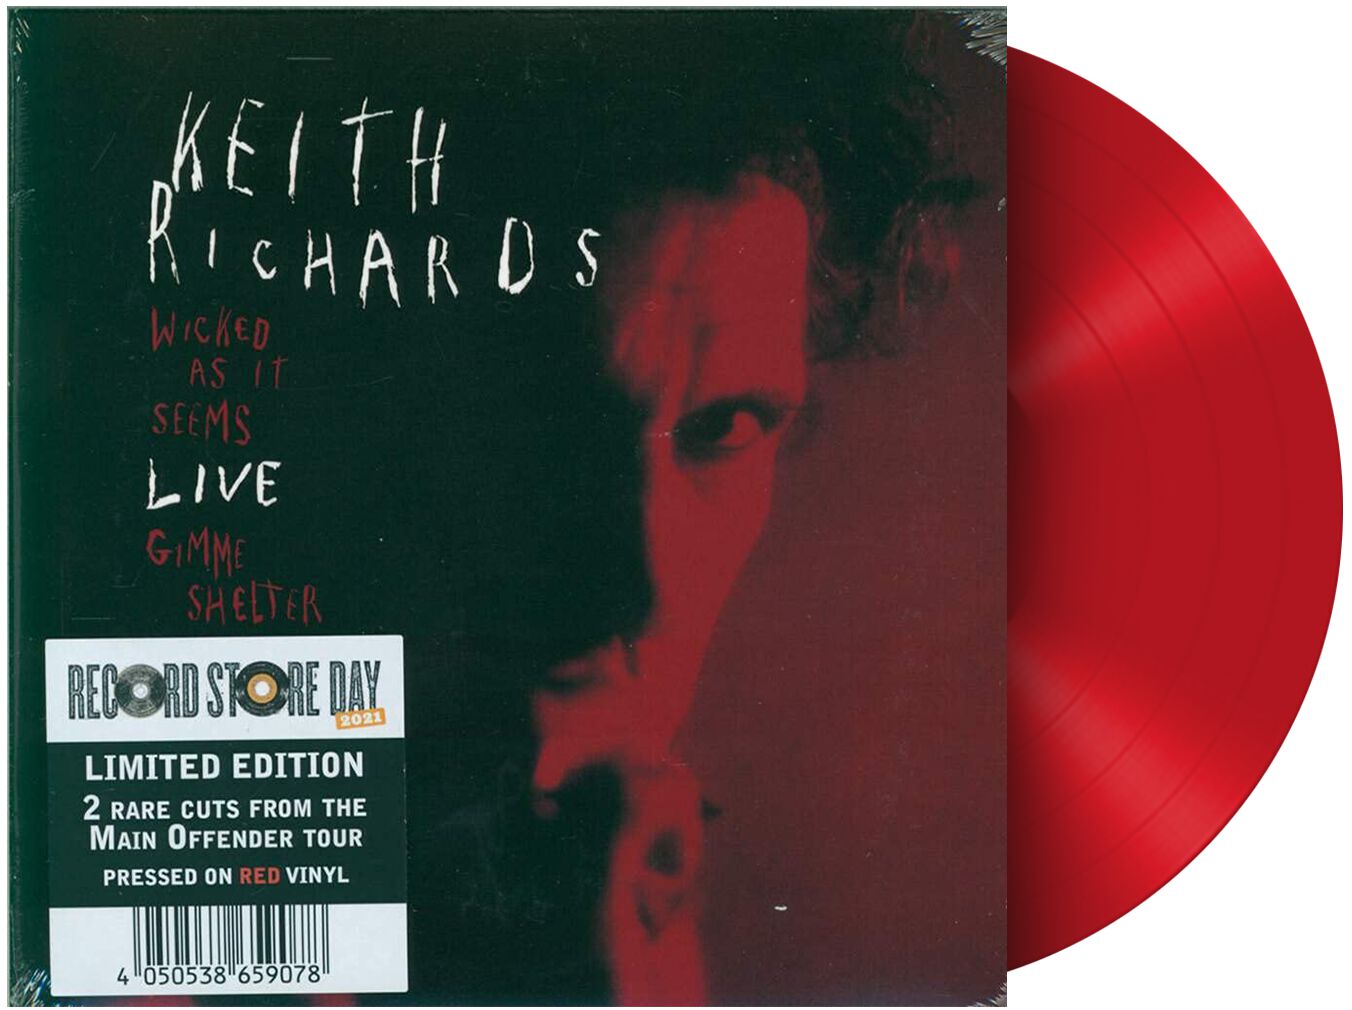 Image of Keith Richards Wicked as it seems - RSD 2021 LP farbig